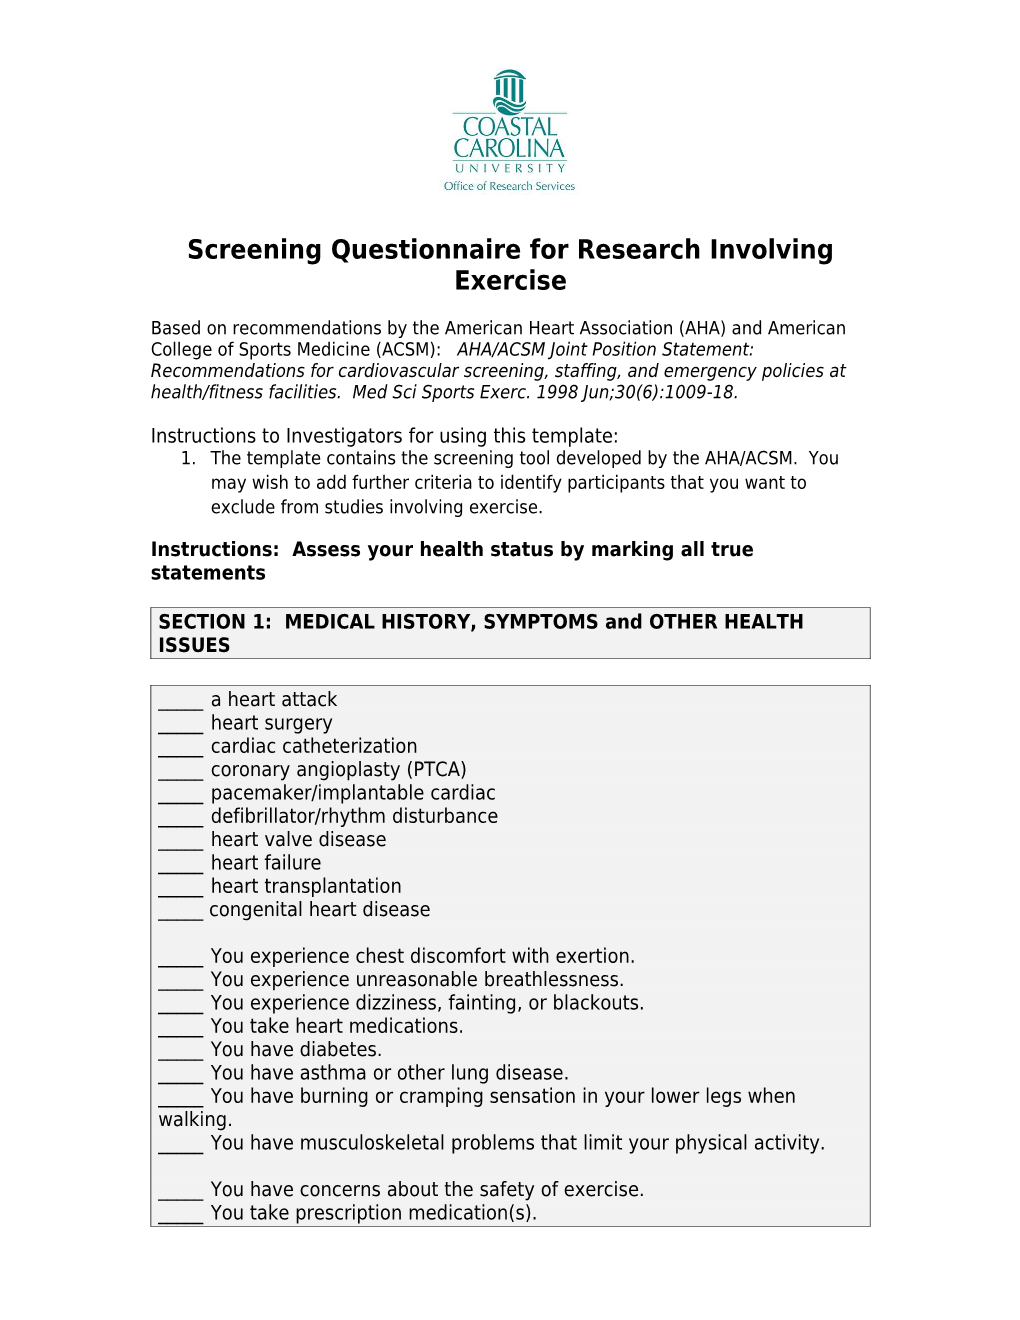 Screening Questionnairefor Research Involving Exercise